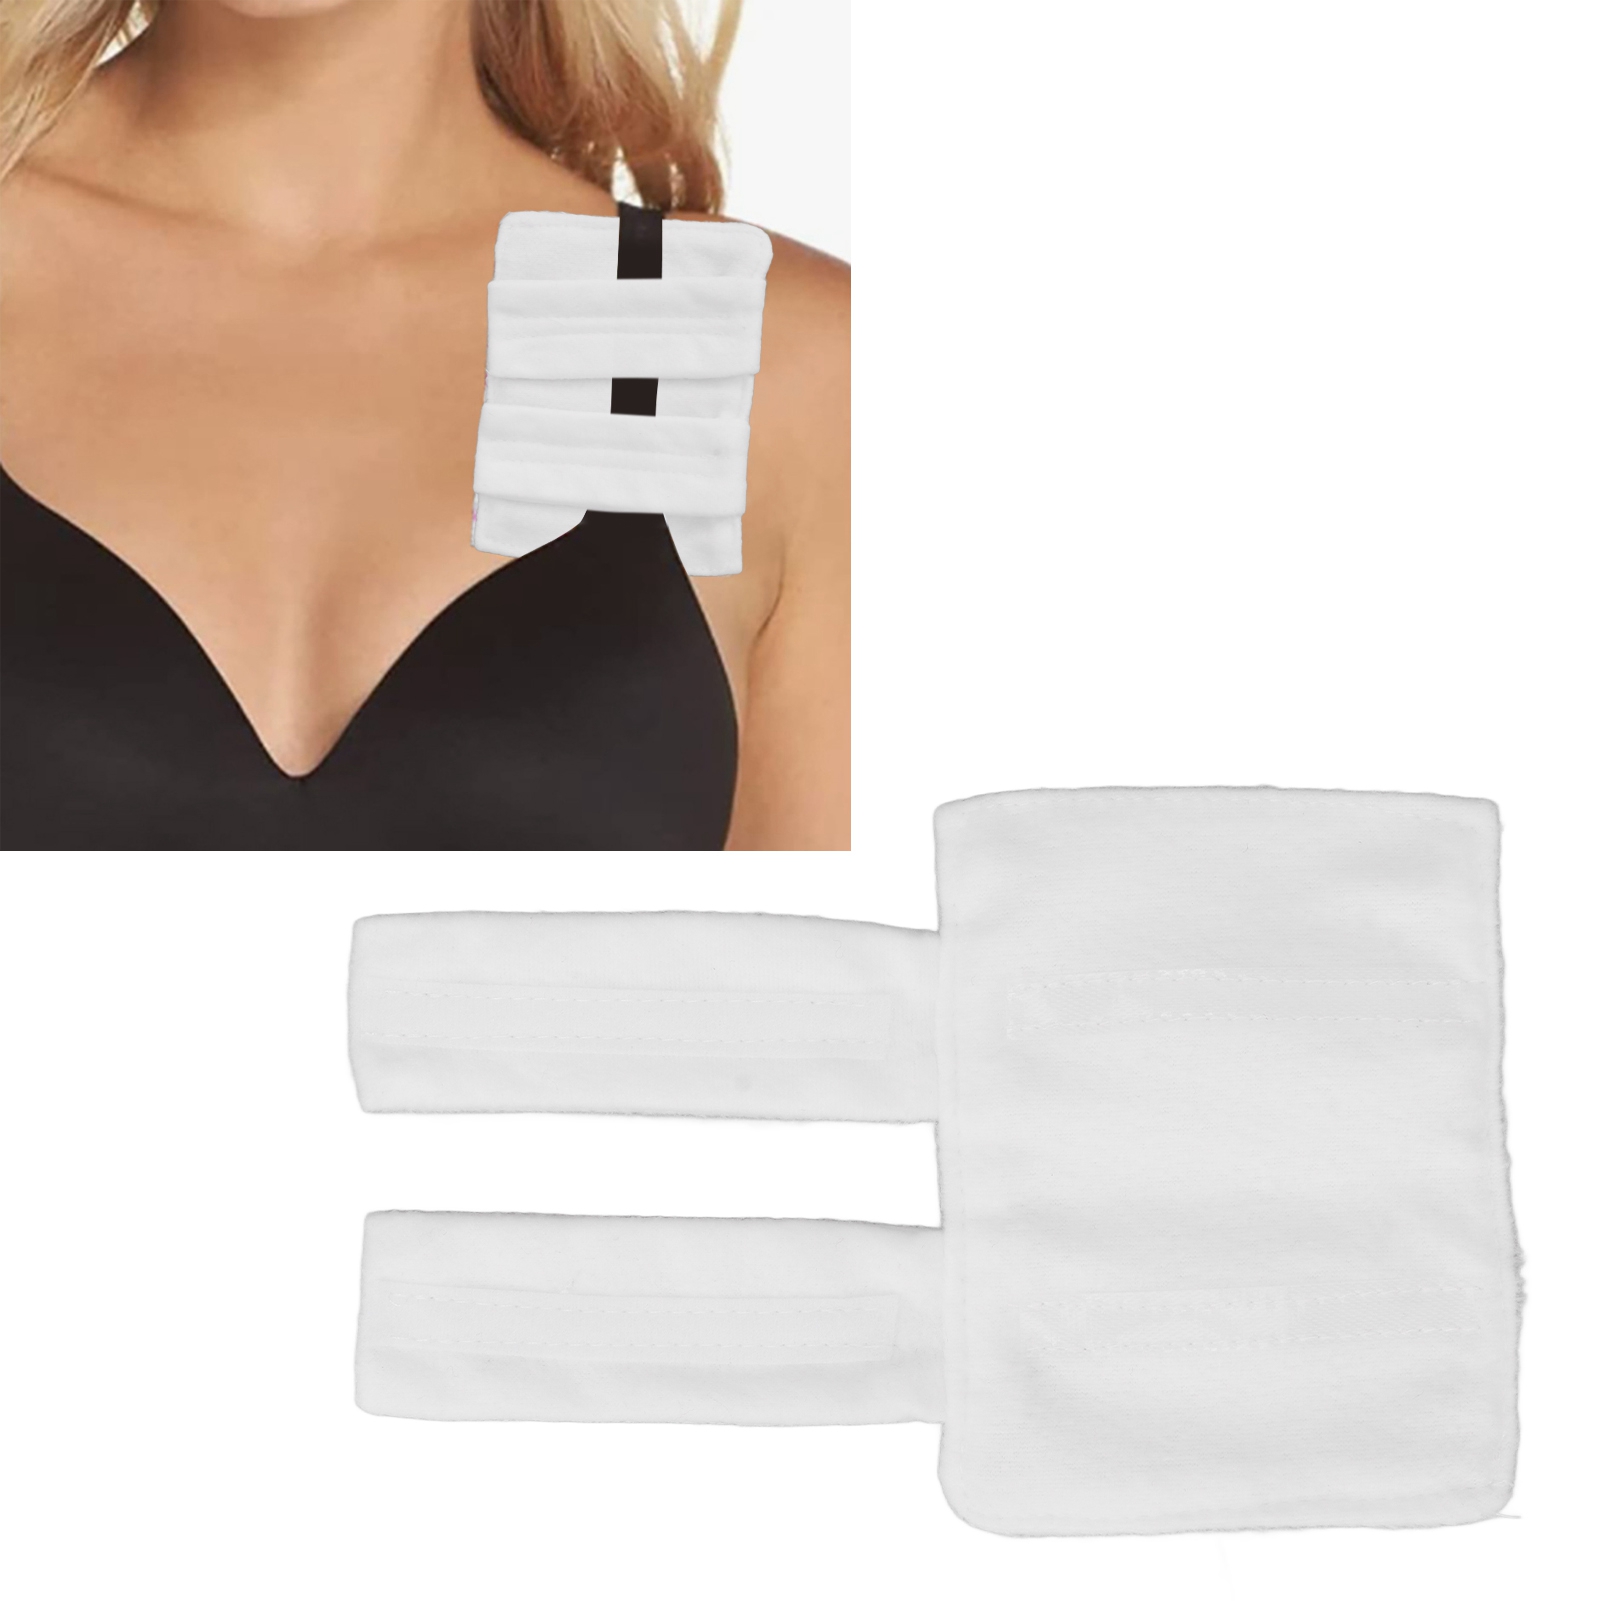 Wondering] Health Pacemaker Pillow Soft Prevent Slip Bra Strap Protector  Chest Post Surgery Pad For Heart Breast Surgery Recovery